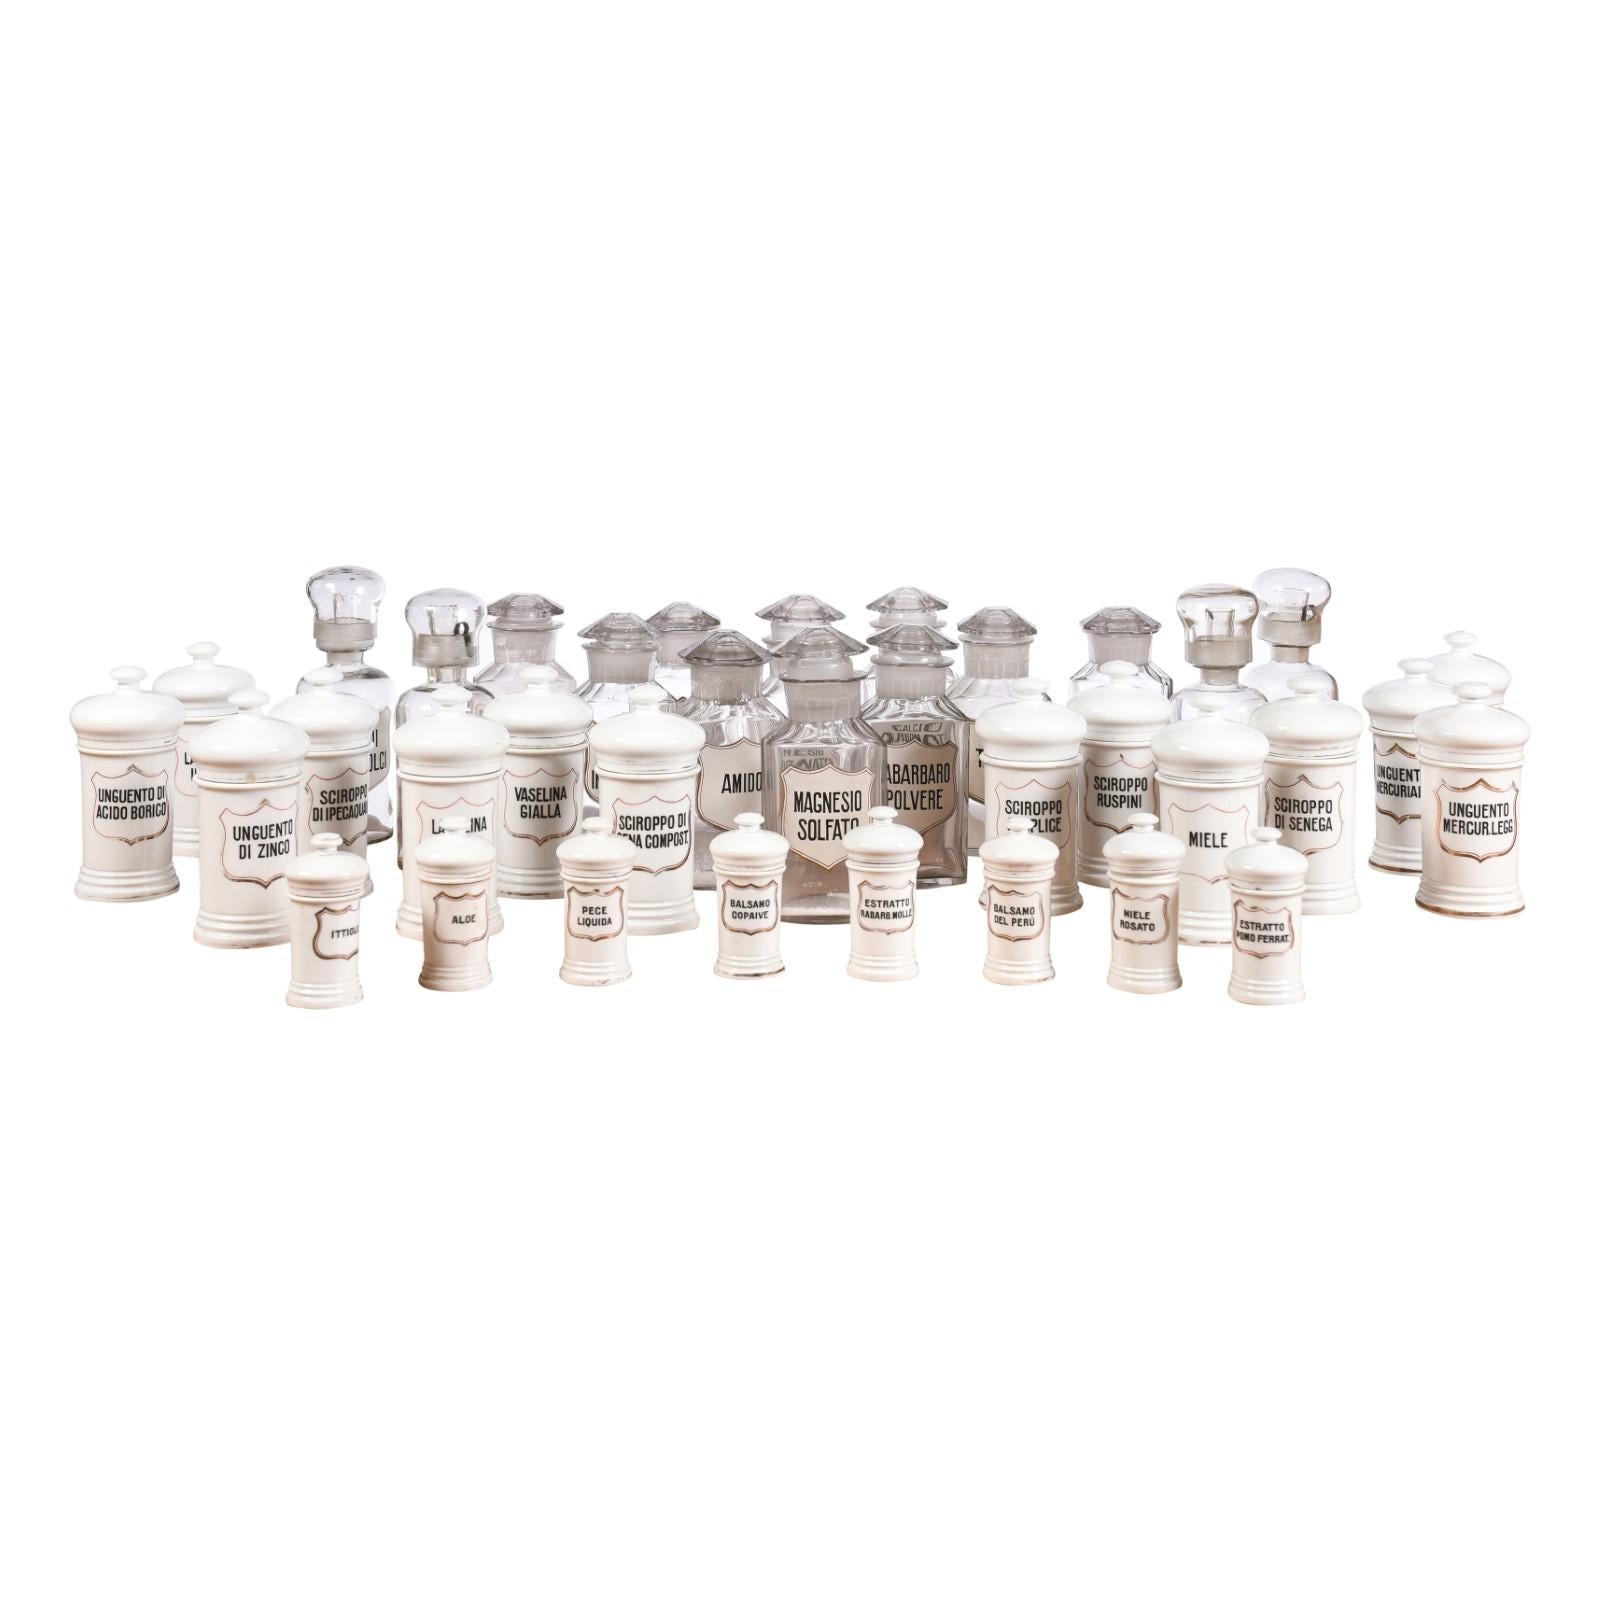 36 Italian pharmacy jars from the 20th century made of either white porcelain or glass and sold individually. Immerse yourself in a piece of history with these charming Italian pharmacy jars, a collection of 36 individual vessels dating back to the